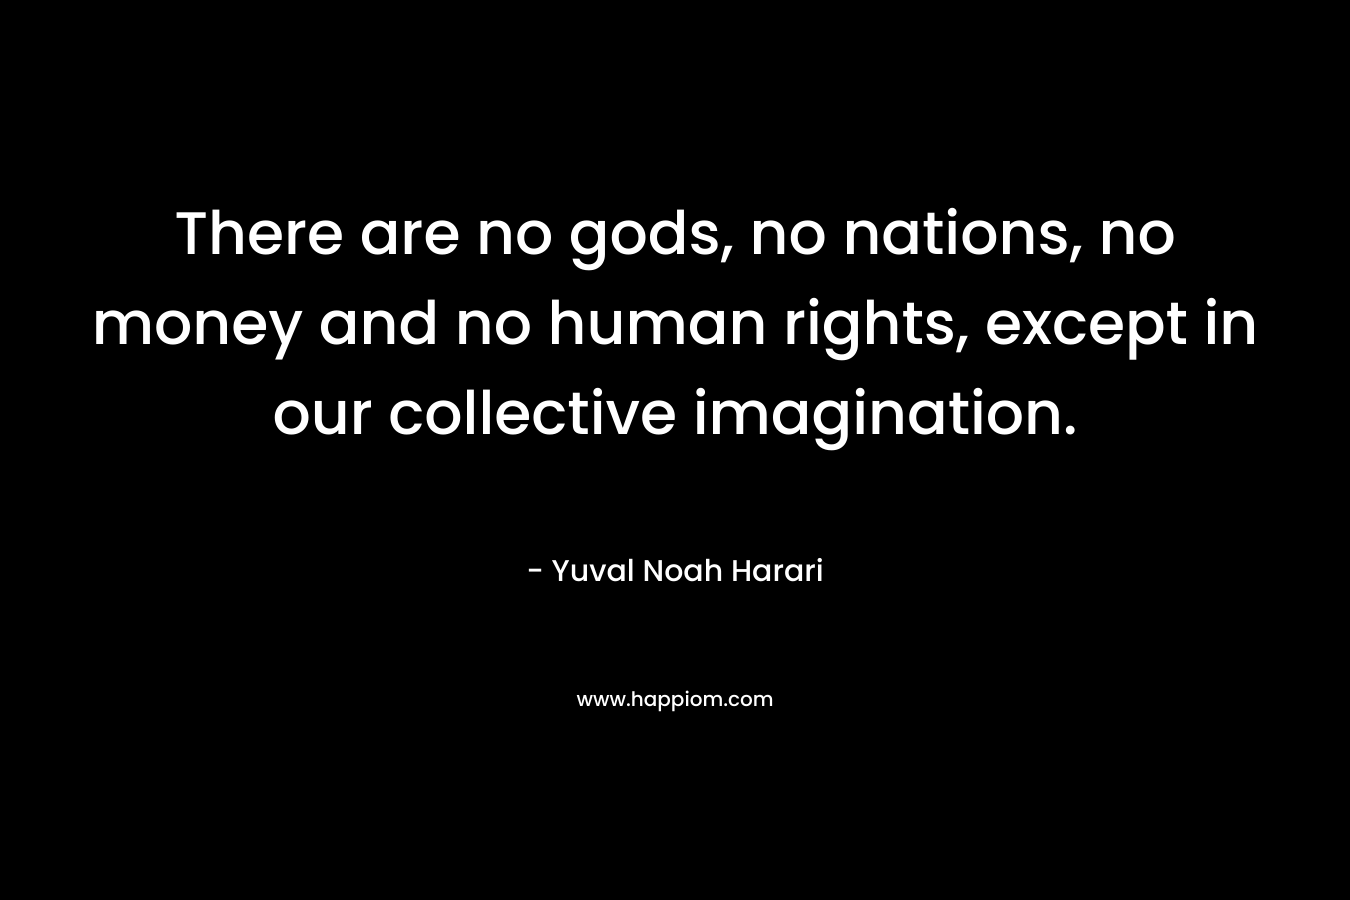 There are no gods, no nations, no money and no human rights, except in our collective imagination.